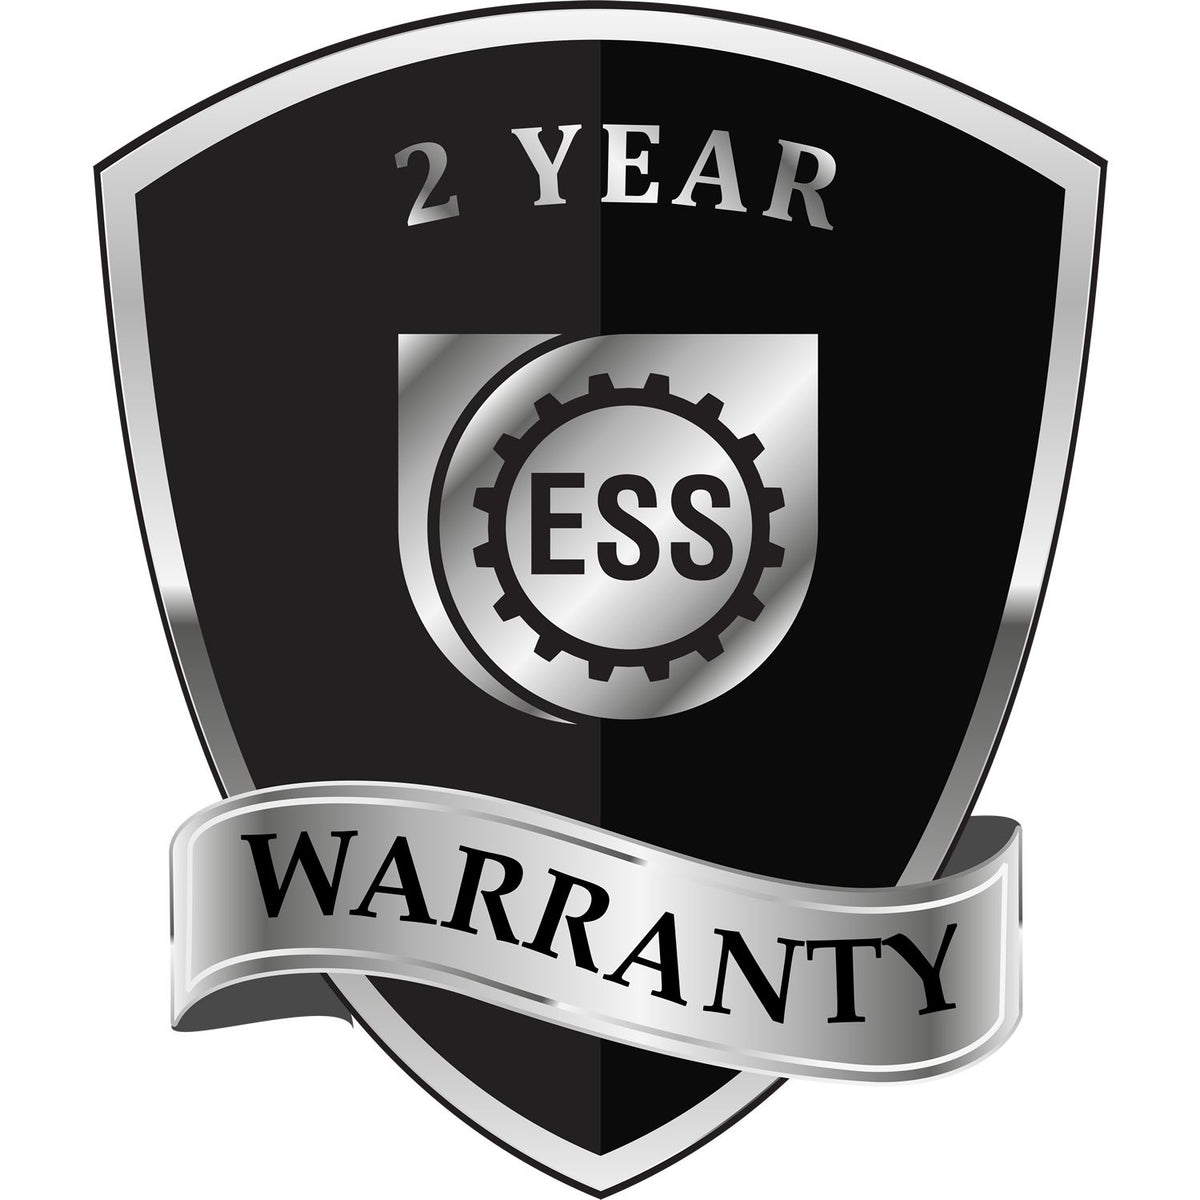 A badge or emblem showing a warranty icon for the State of Pennsylvania Extended Long Reach Engineer Seal